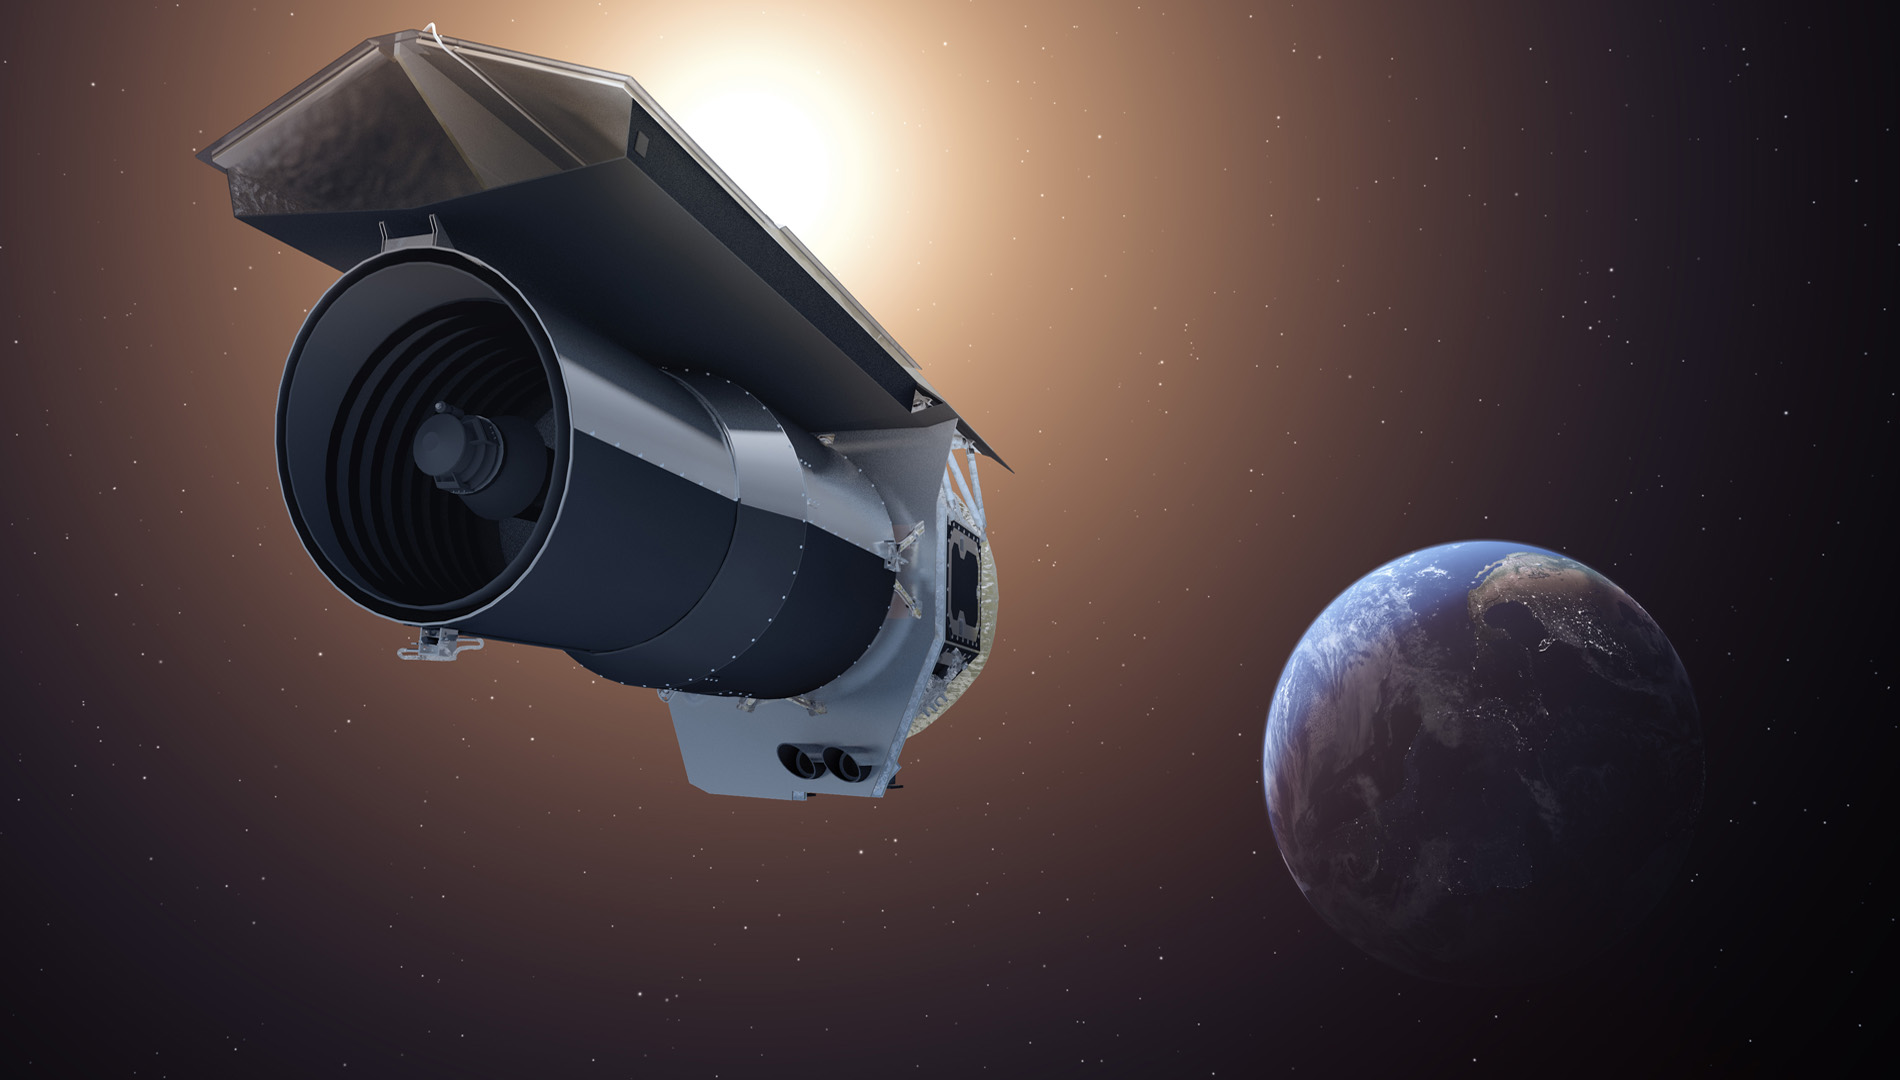 11 of 11. This artist's concept shows NASA's Spitzer Space Telescope. Spitzer begins its 'Beyond' mission phase on Oct. 1, 2016. Spitzer is depicted in the orientation it assumes to establish communications with ground stations. On January 30th 2020, NASA's Spitzer Space Telescope completed its mission. [Credit: NASA/JPL-Caltech/T. Pyle (IPAC)]